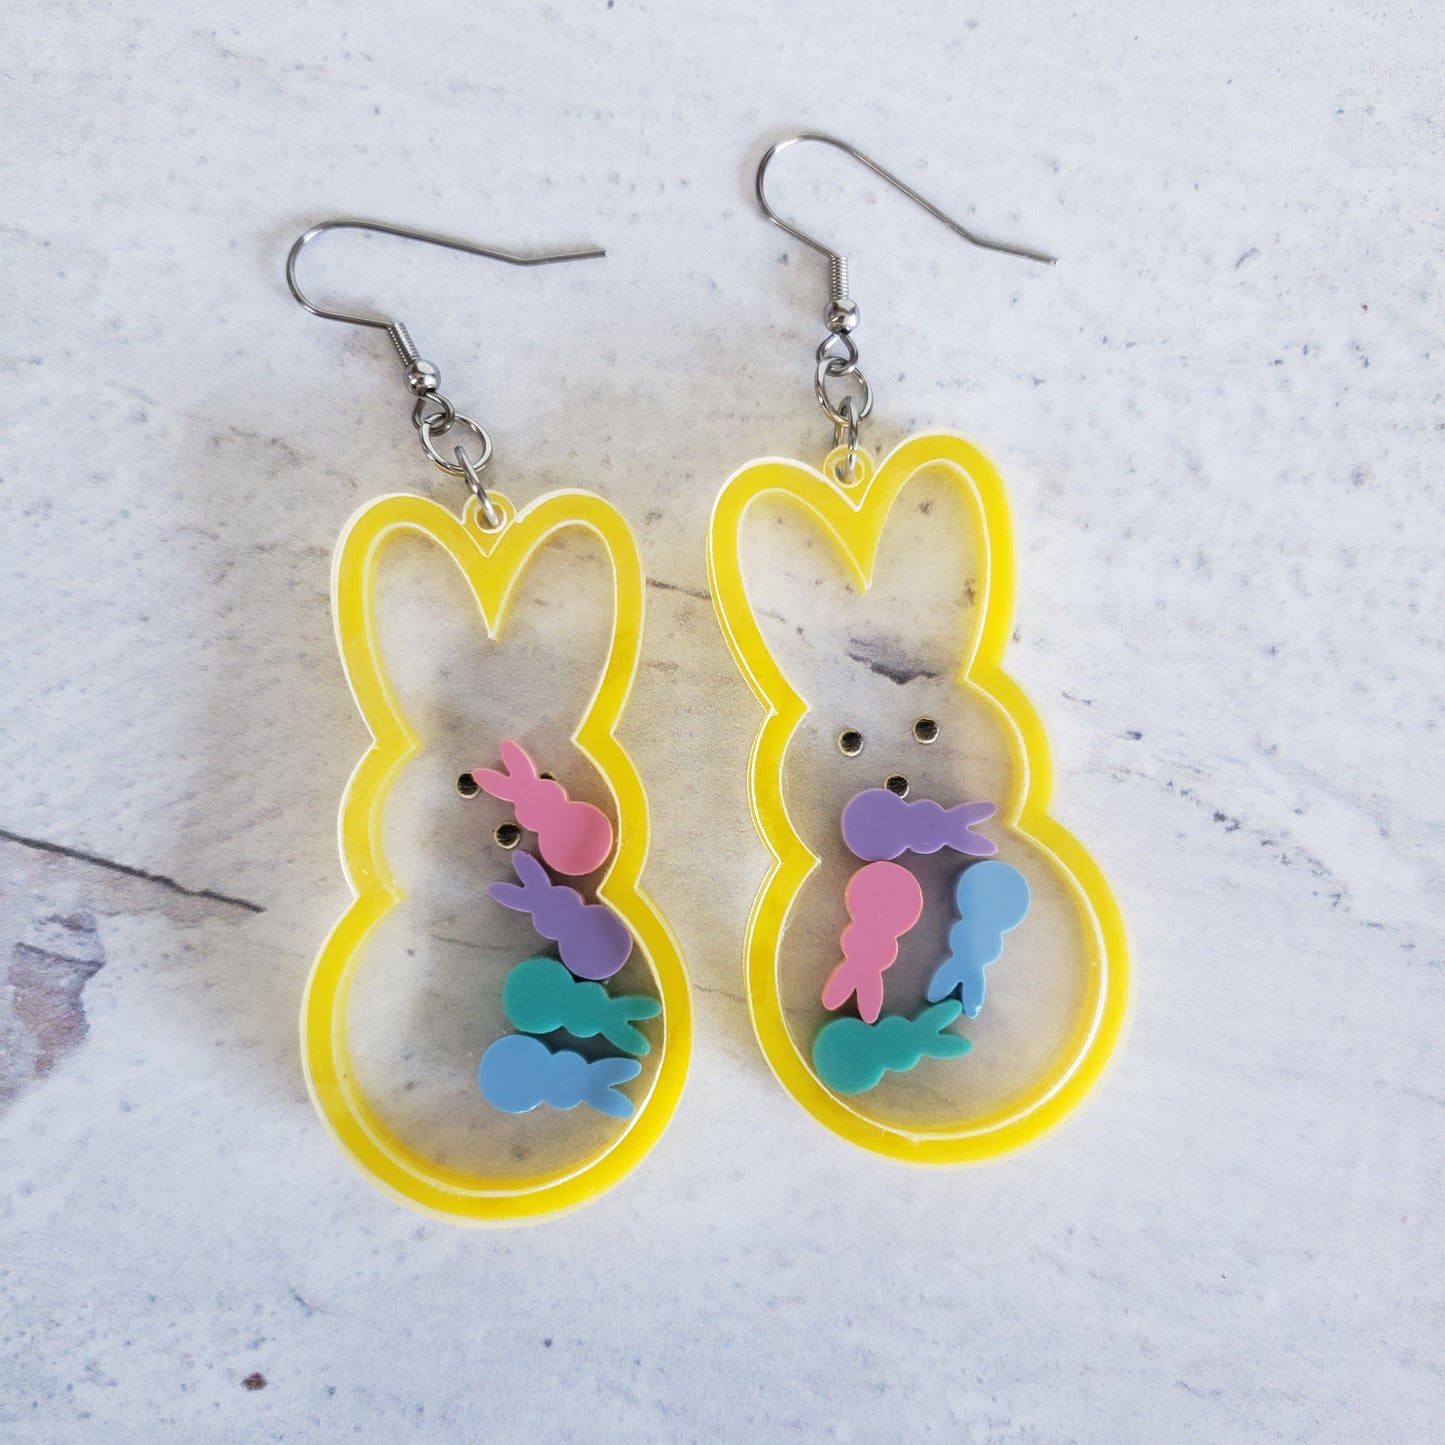 Marshmallow bunny shaker earrings in yellow with pastel bunnies inside on stainless steel earring wires.